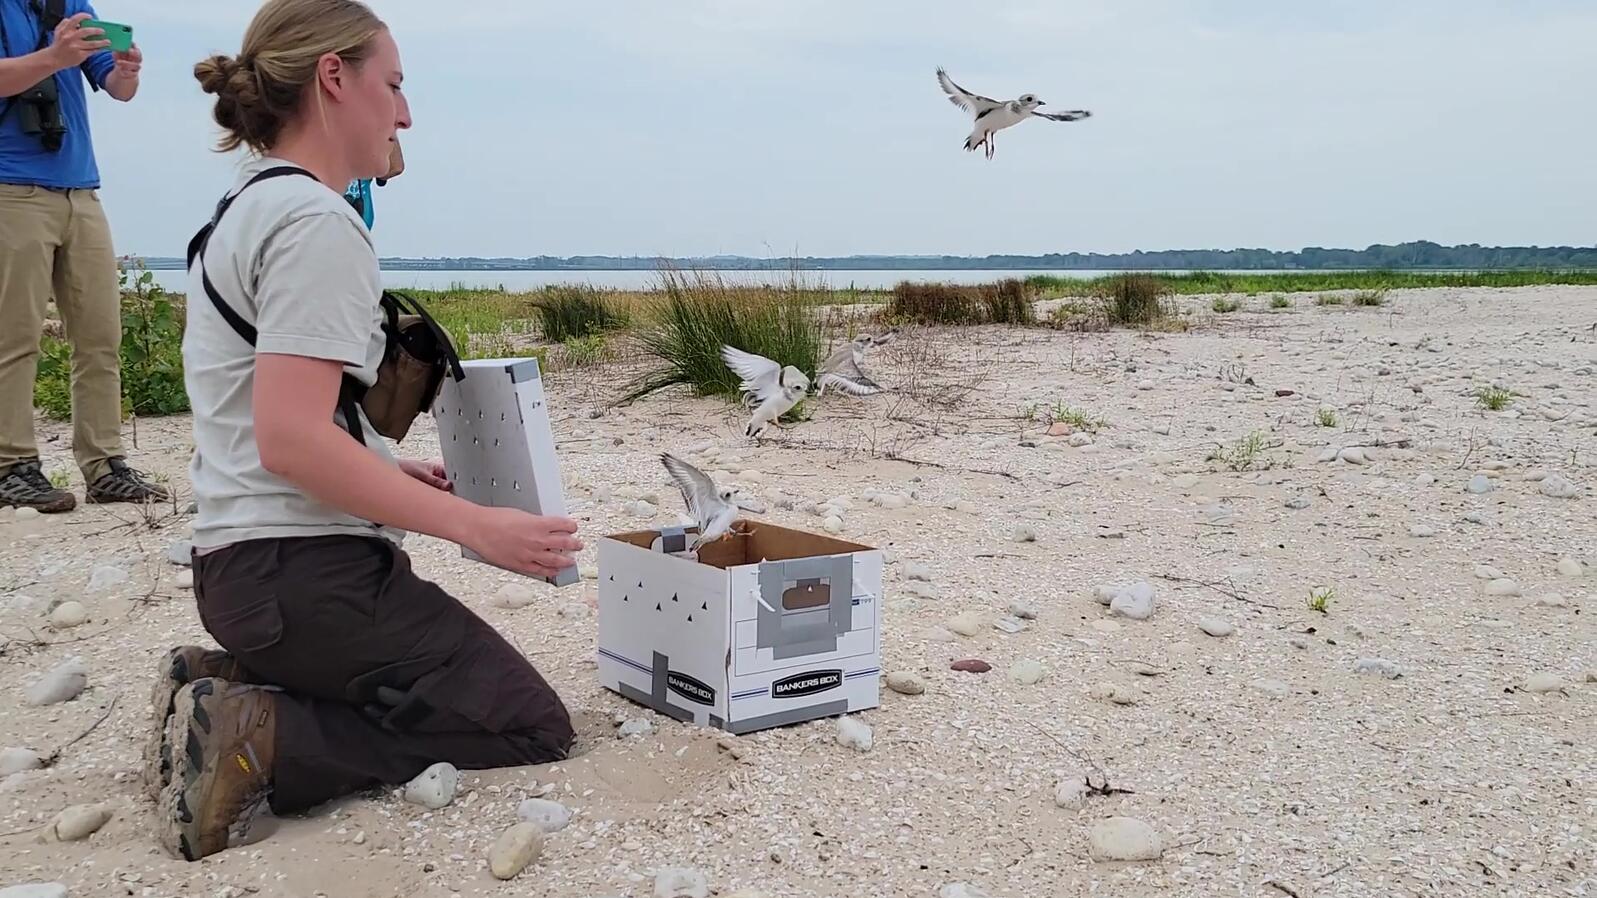 Fish and Wildlife Service, Audubon Great Lakes and partners at Detroit Zoo and University of Minnesota, released four federally endangered Great Lakes piping plover chicks at the Cat Island Restoration Site, in Lower Green Bay.